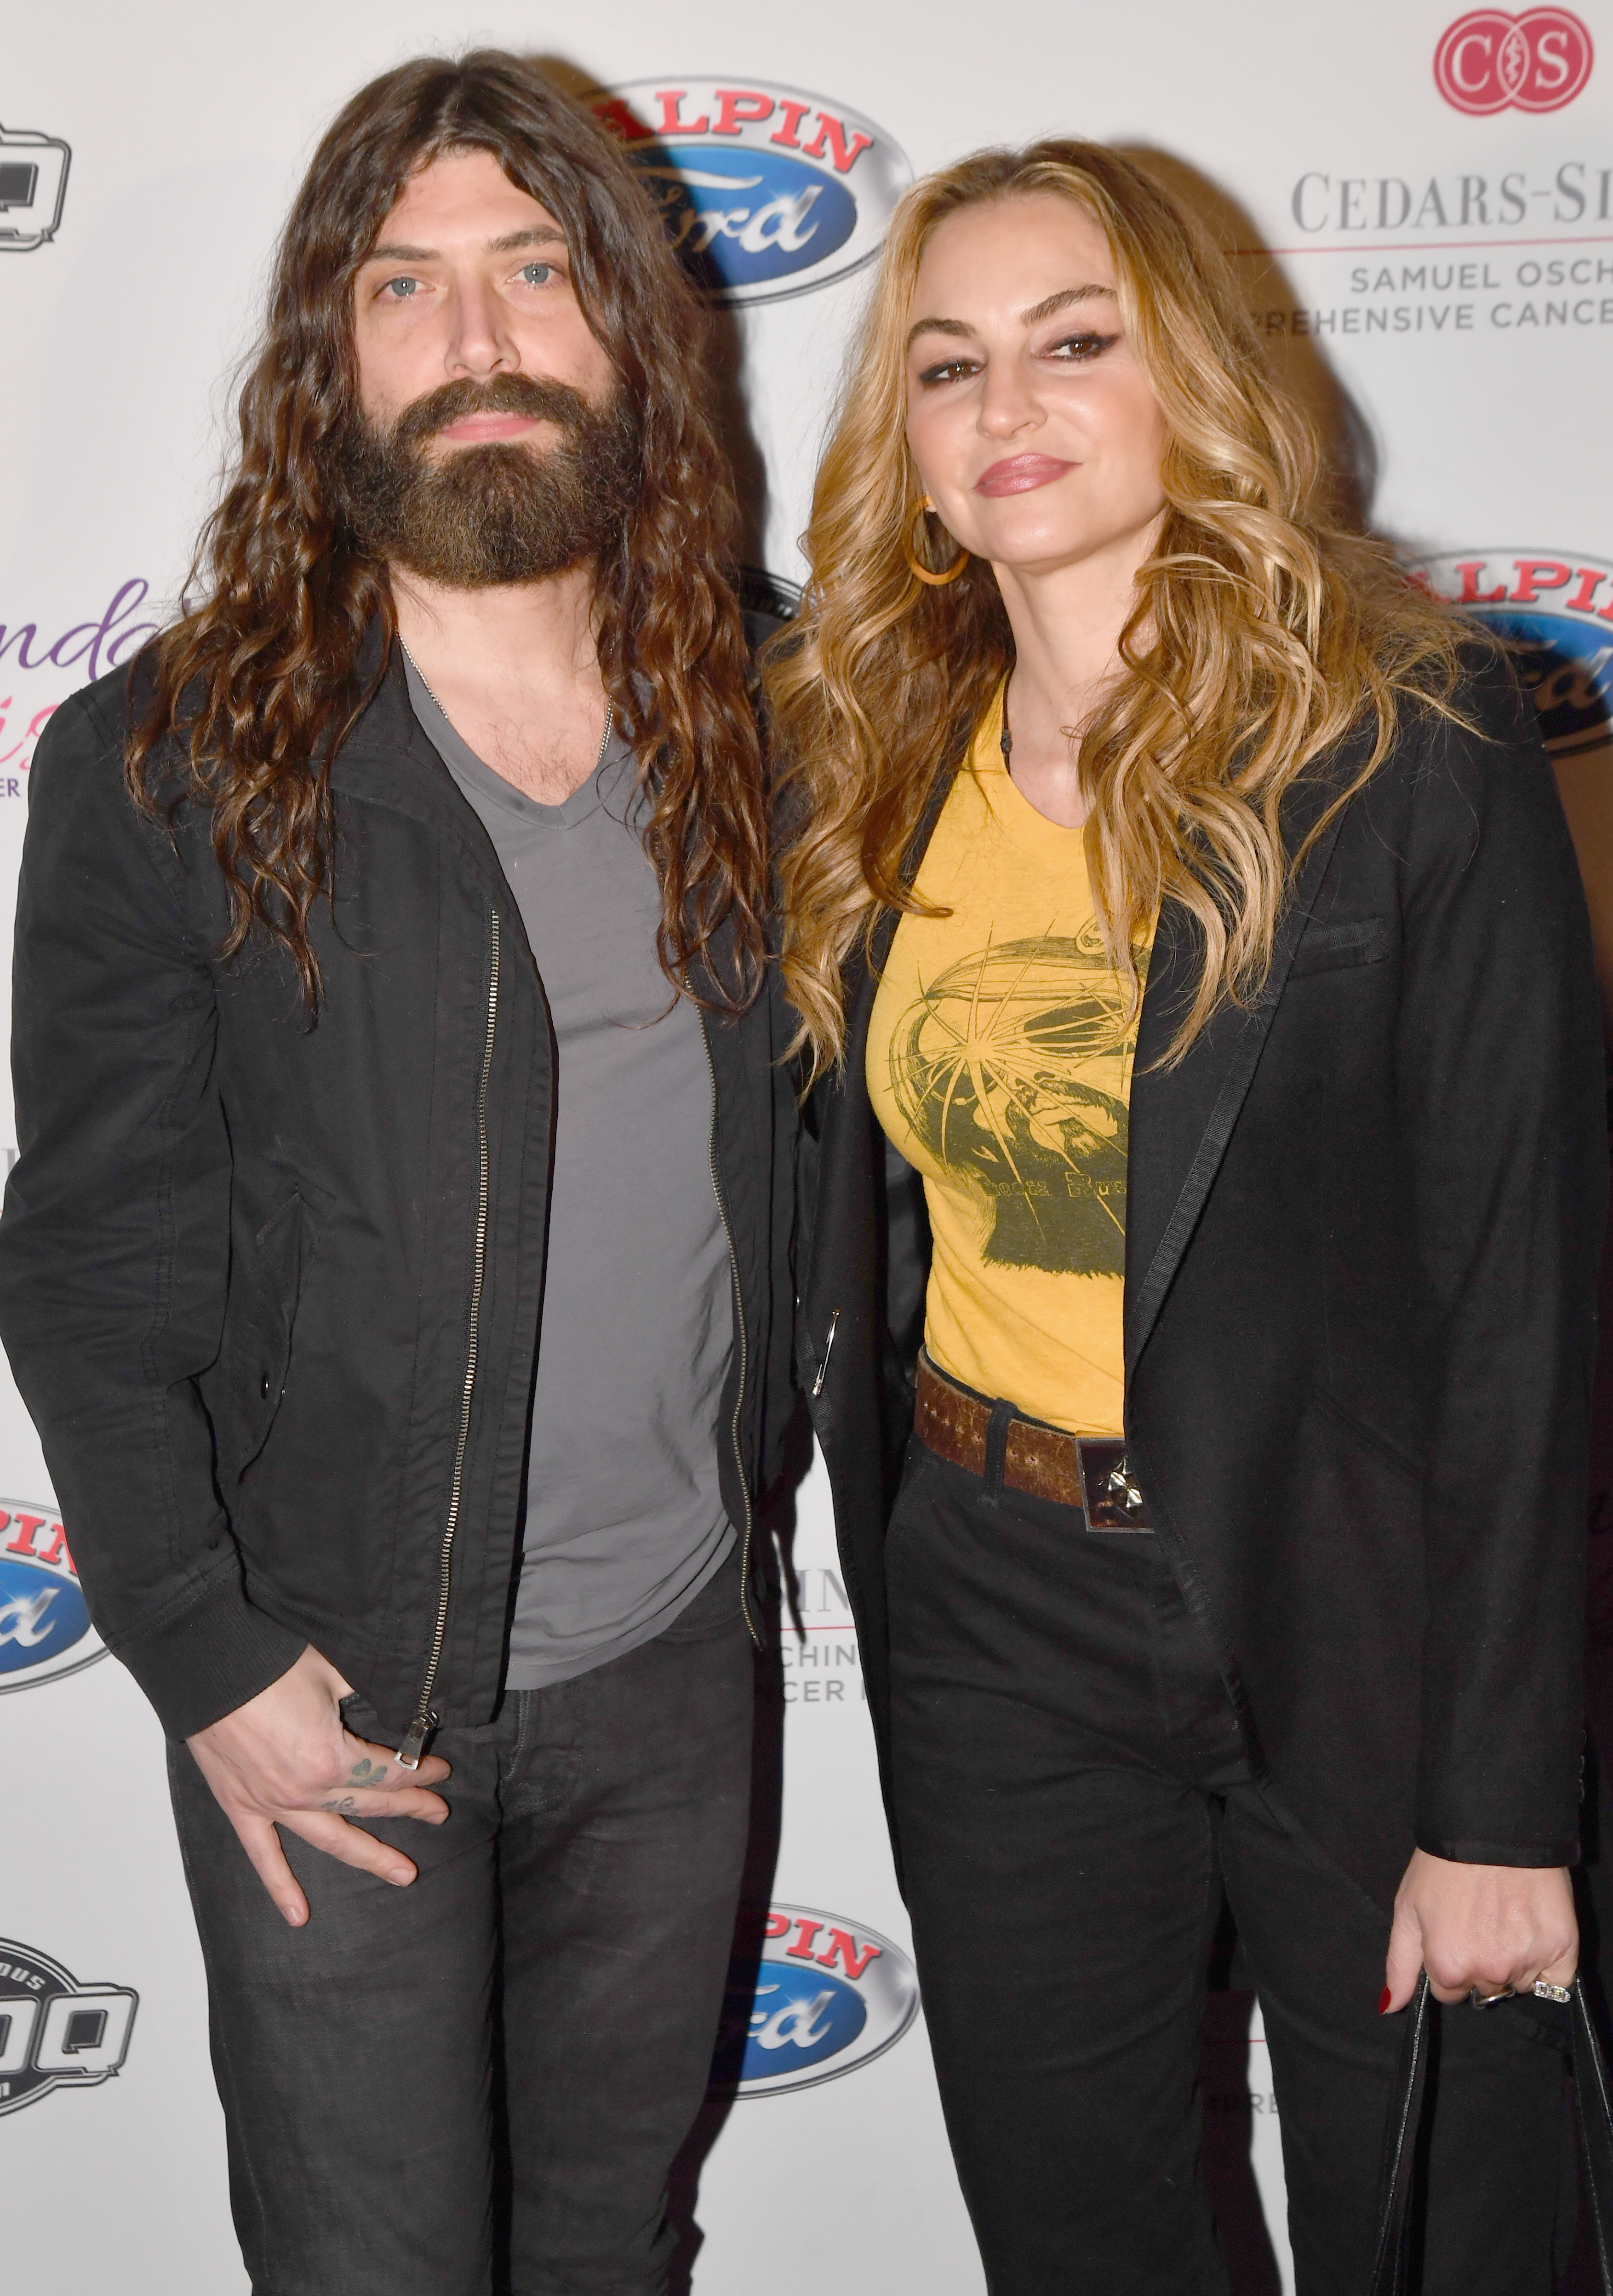 Michael Devin and Drea de Matteo attend the 2017 Rhonda's Kiss Benefit Concert at Hollywood Palladium on December 8, 2017, in Los Angeles, California. | Source: Getty Images